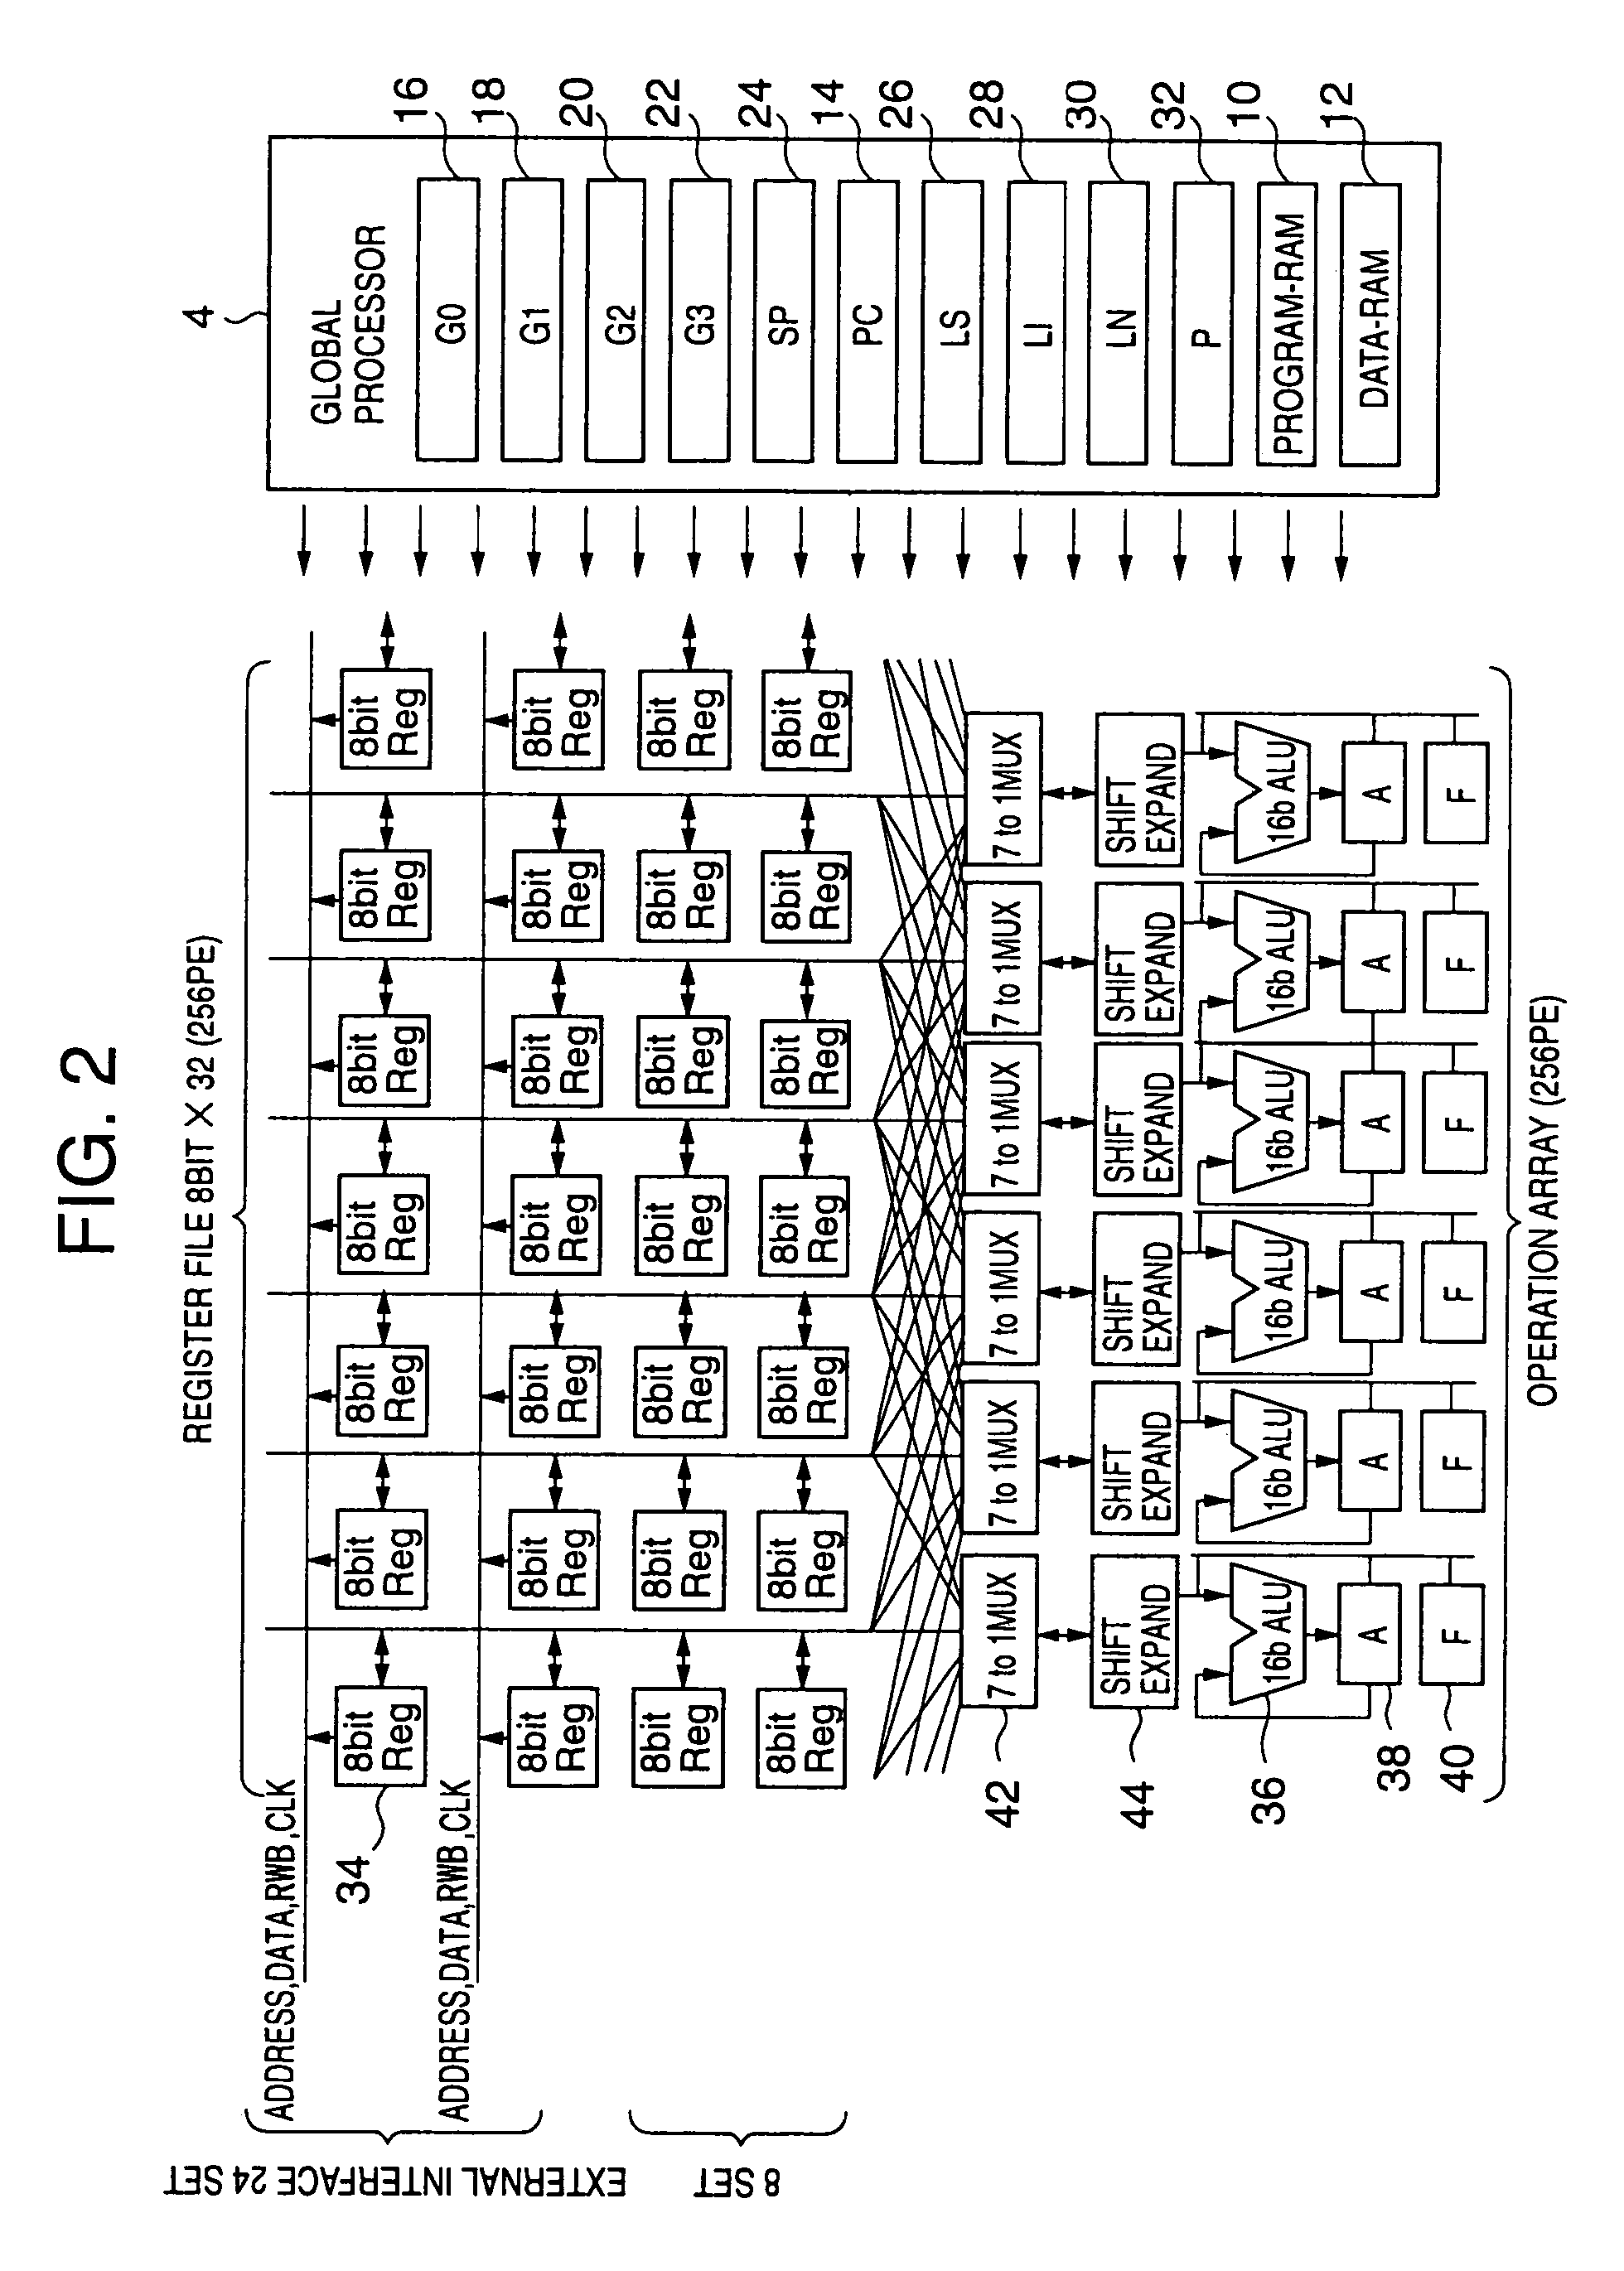 SIMD processor with exchange sort instruction operating or plural data elements simultaneously